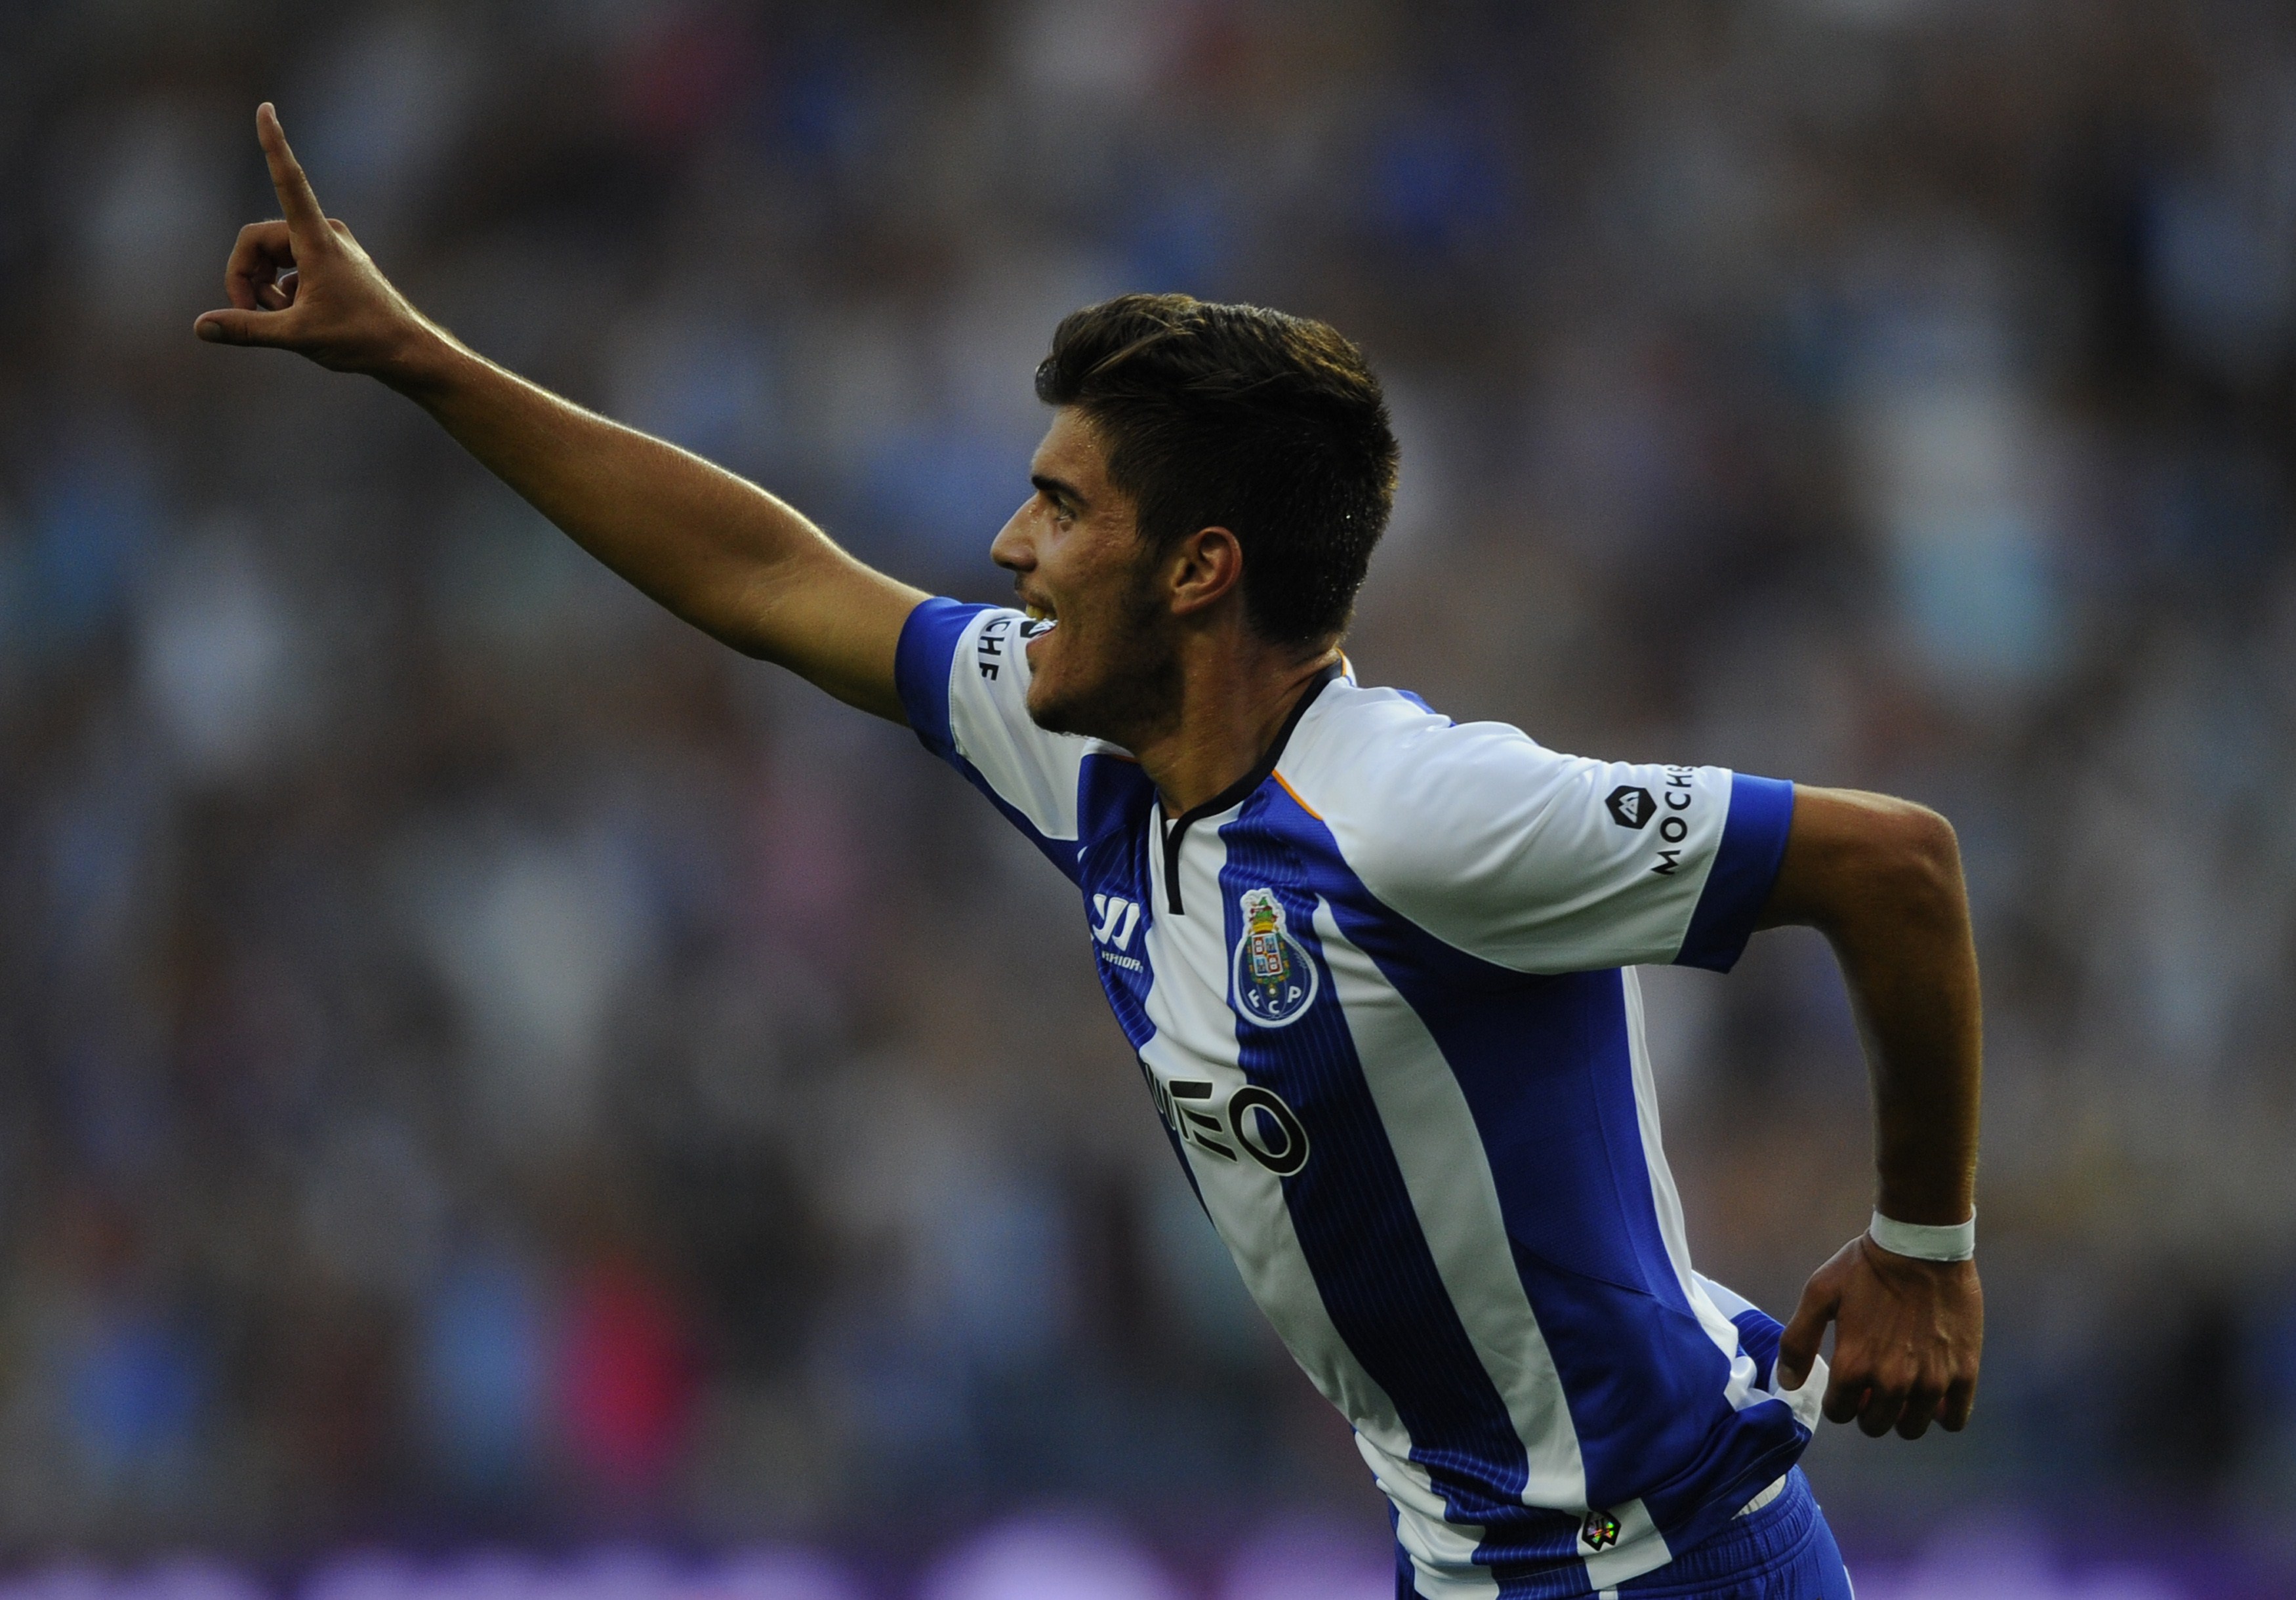 Ruben Neves celebrates after scoring for Porto against Maritimo in August 2014.